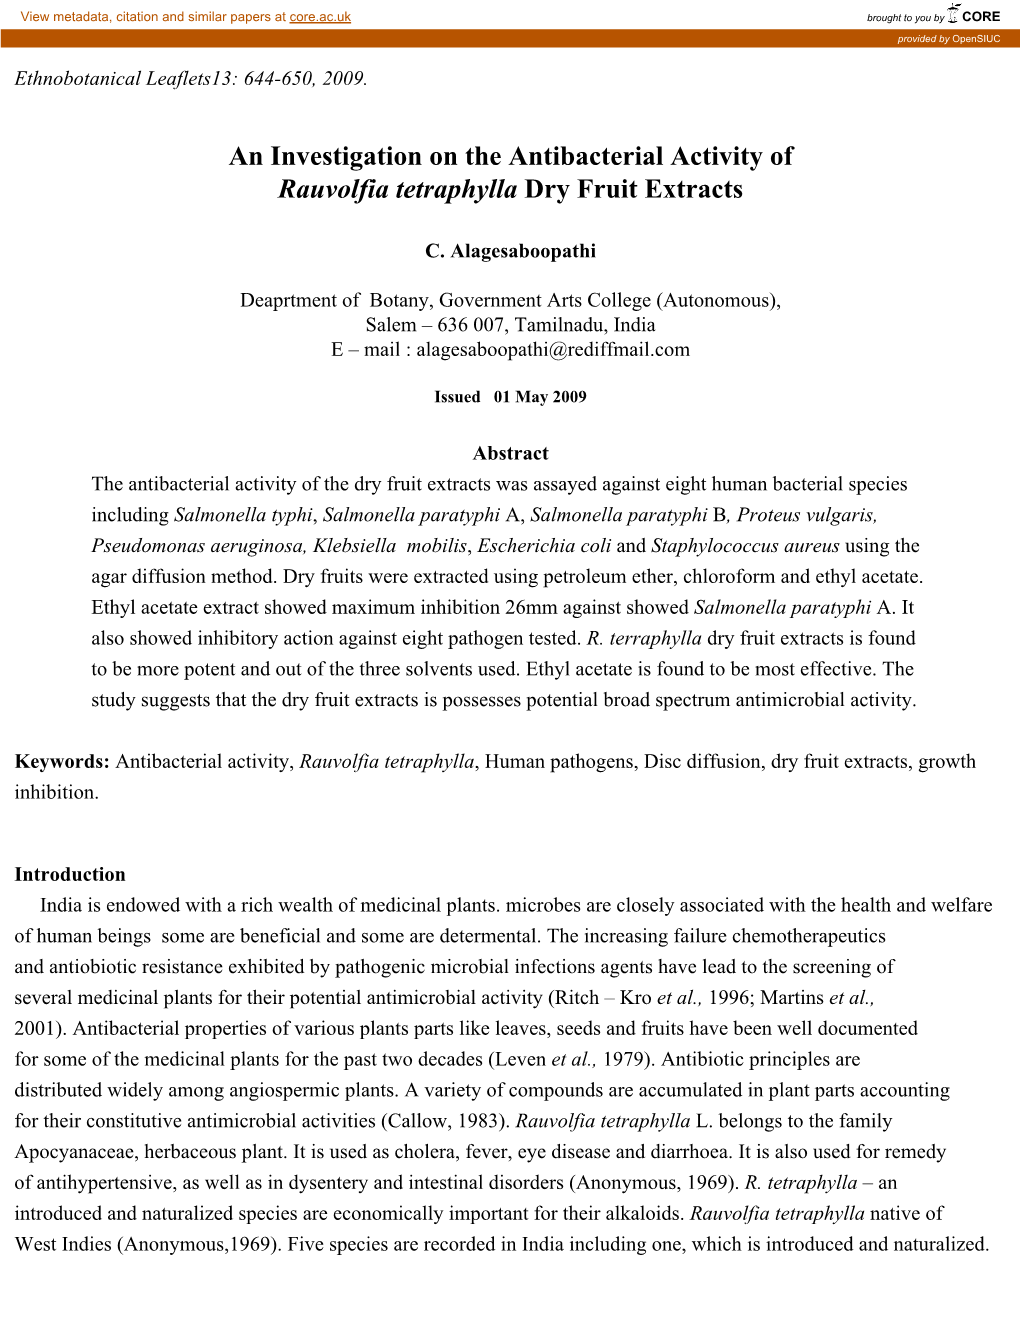 An Investigation on the Antibacterial Activity of Rauvolfia Tetraphylla Dry Fruit Extracts